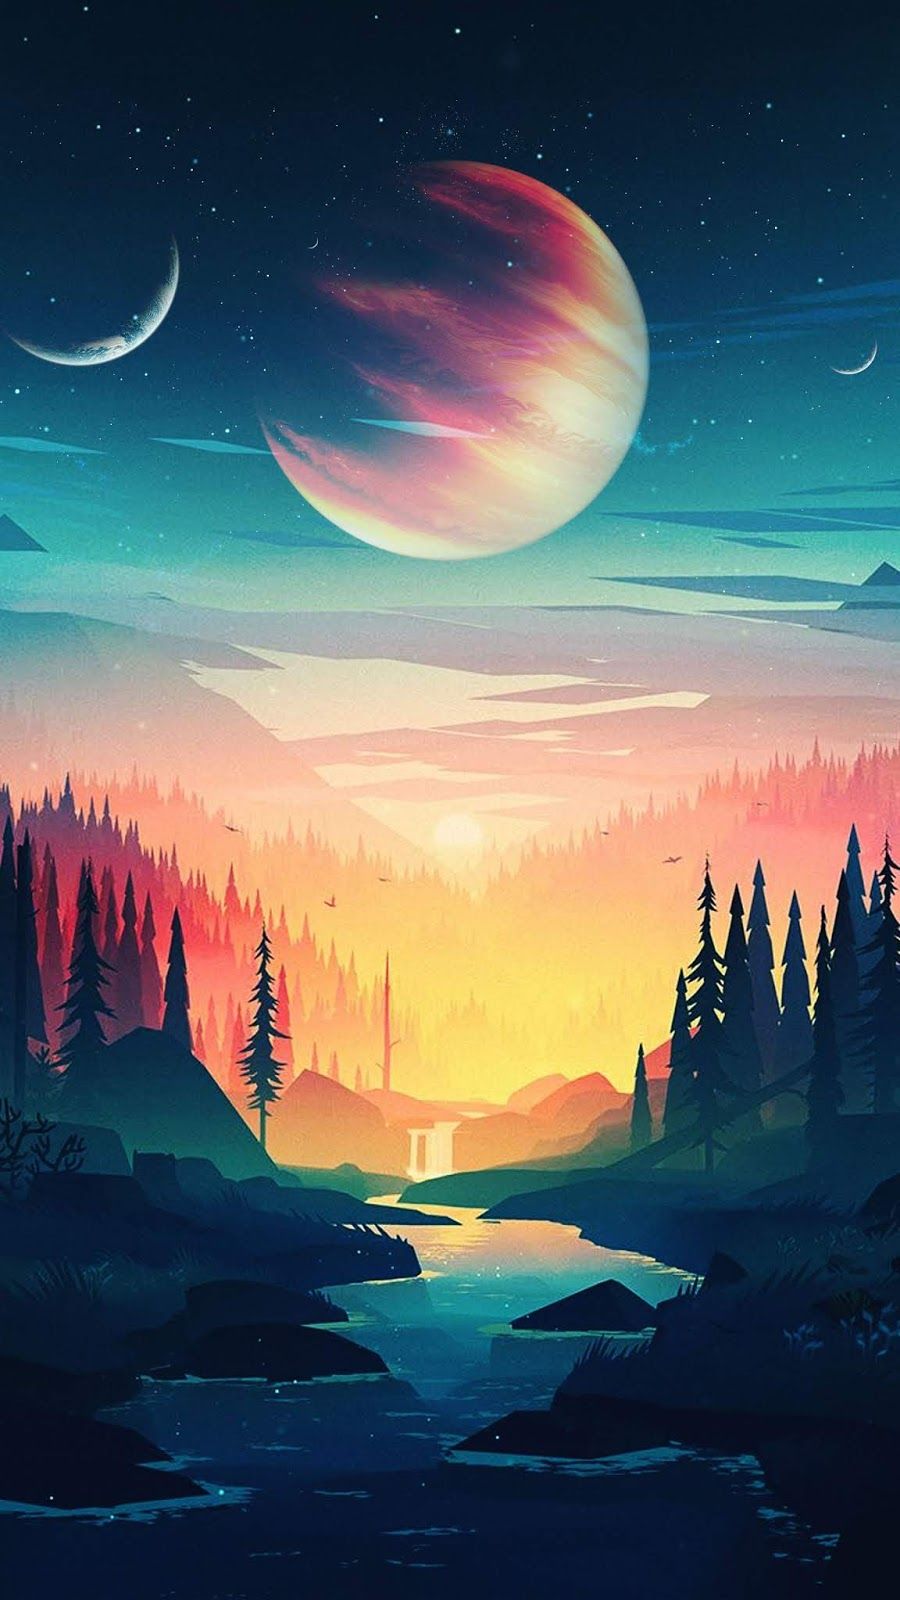 Looking for a new wallpaper for your phone or computer? Check out our stunning collection of high-quality wallpapers that will make your screen come to life! From scenic landscapes to abstract designs, we\'ve got it all. Download your favorite wallpaper now and give your device a fresh new look!